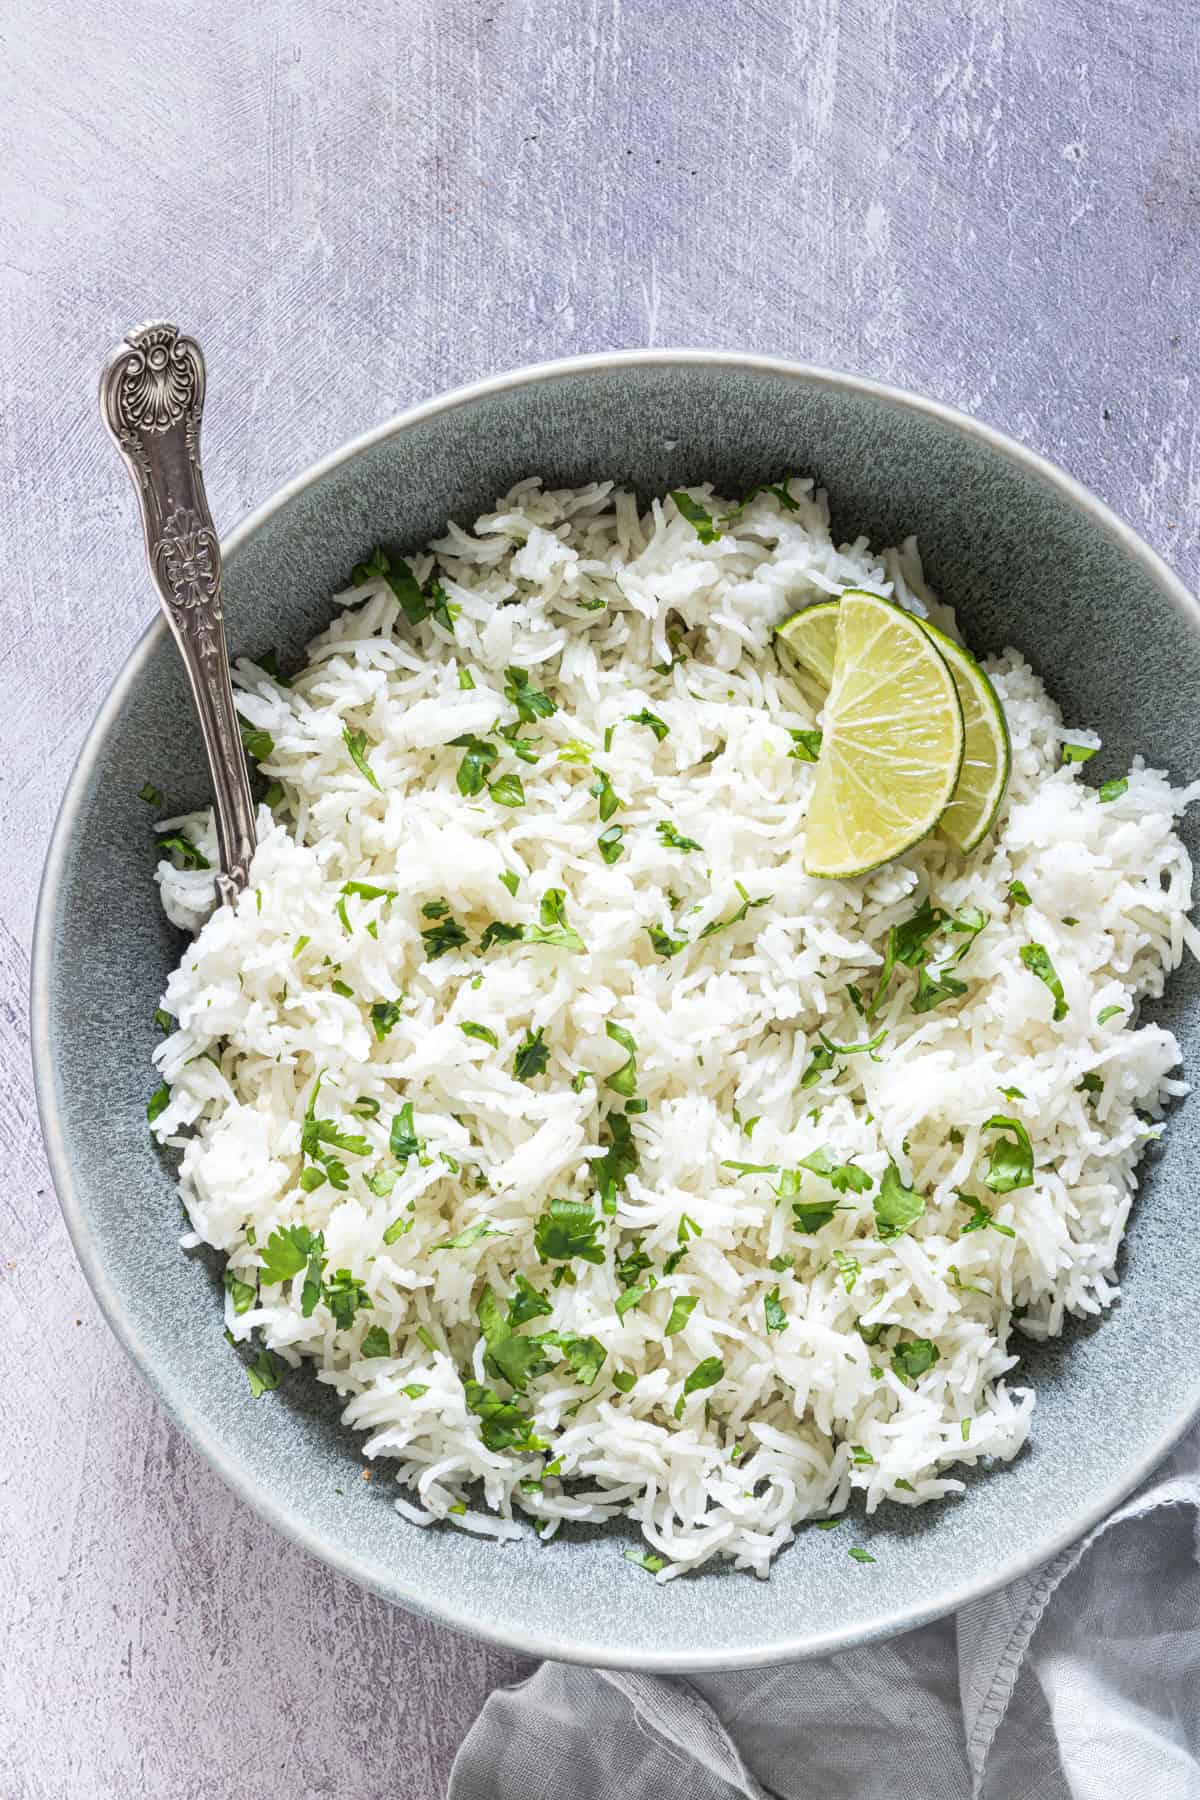 top down view of the finished Instant pot Cilantro Lime Rice served in a bowl with a silver serving spoon